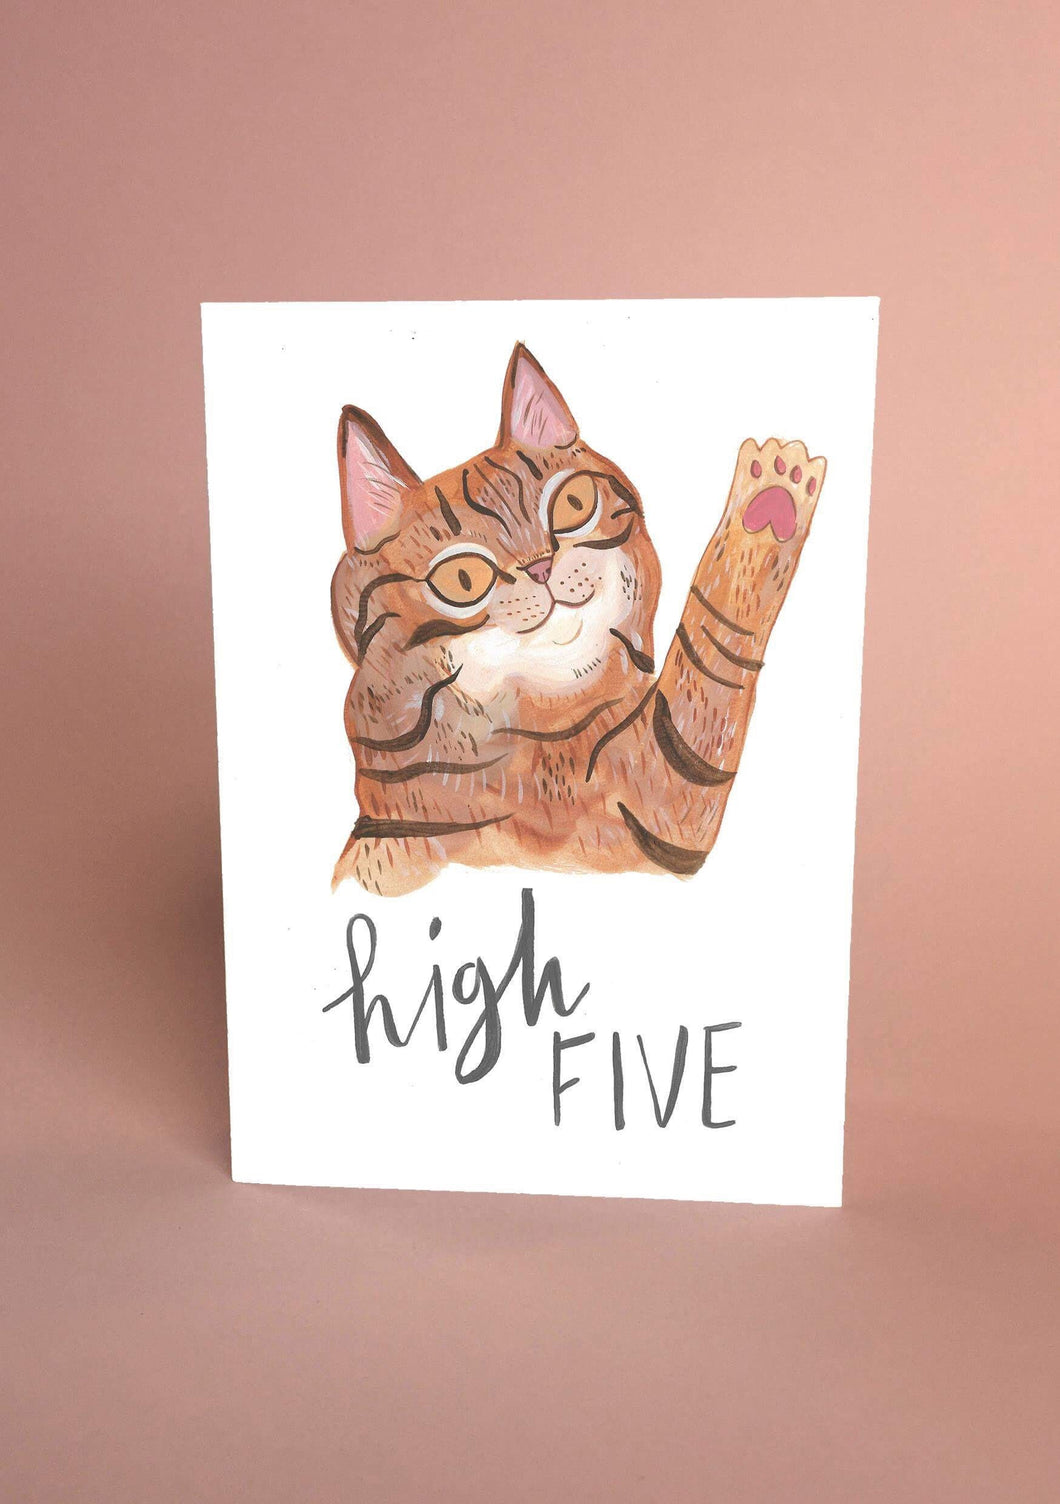 High Five Tabby Cat Greetings Card - Cute Cat Illustration, Congratulations Card, Well Done, Animal Card, Blank Inside, Small A6 Card - Fernandes Makes